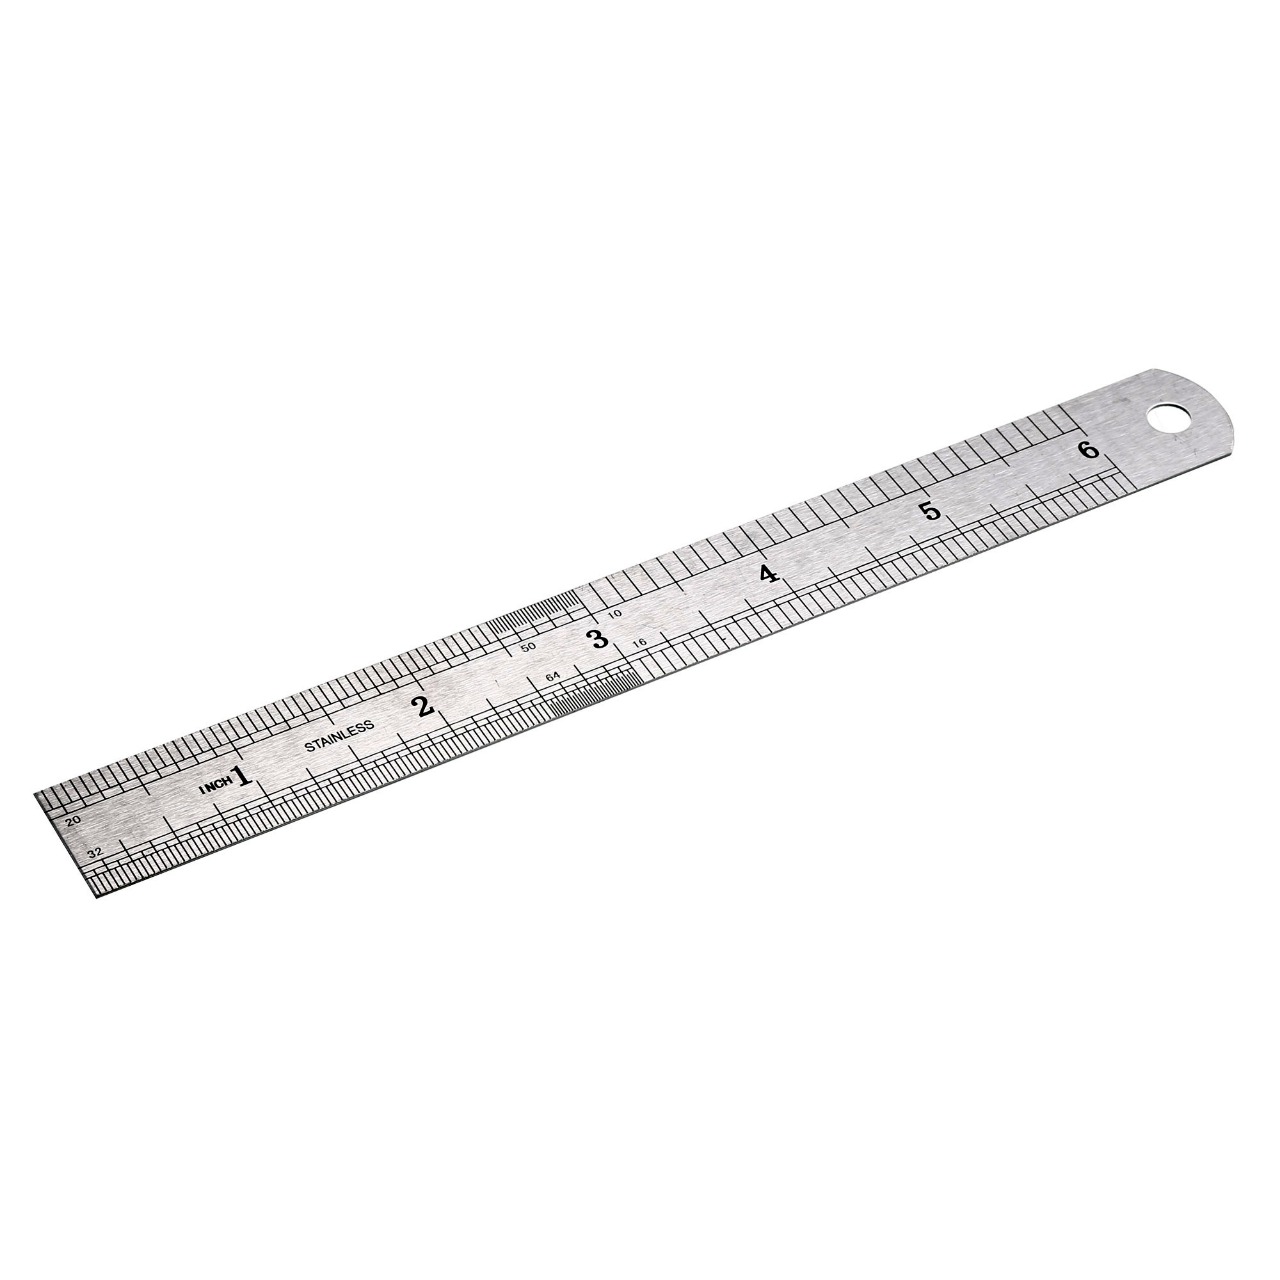 6in. Surgical Ruler